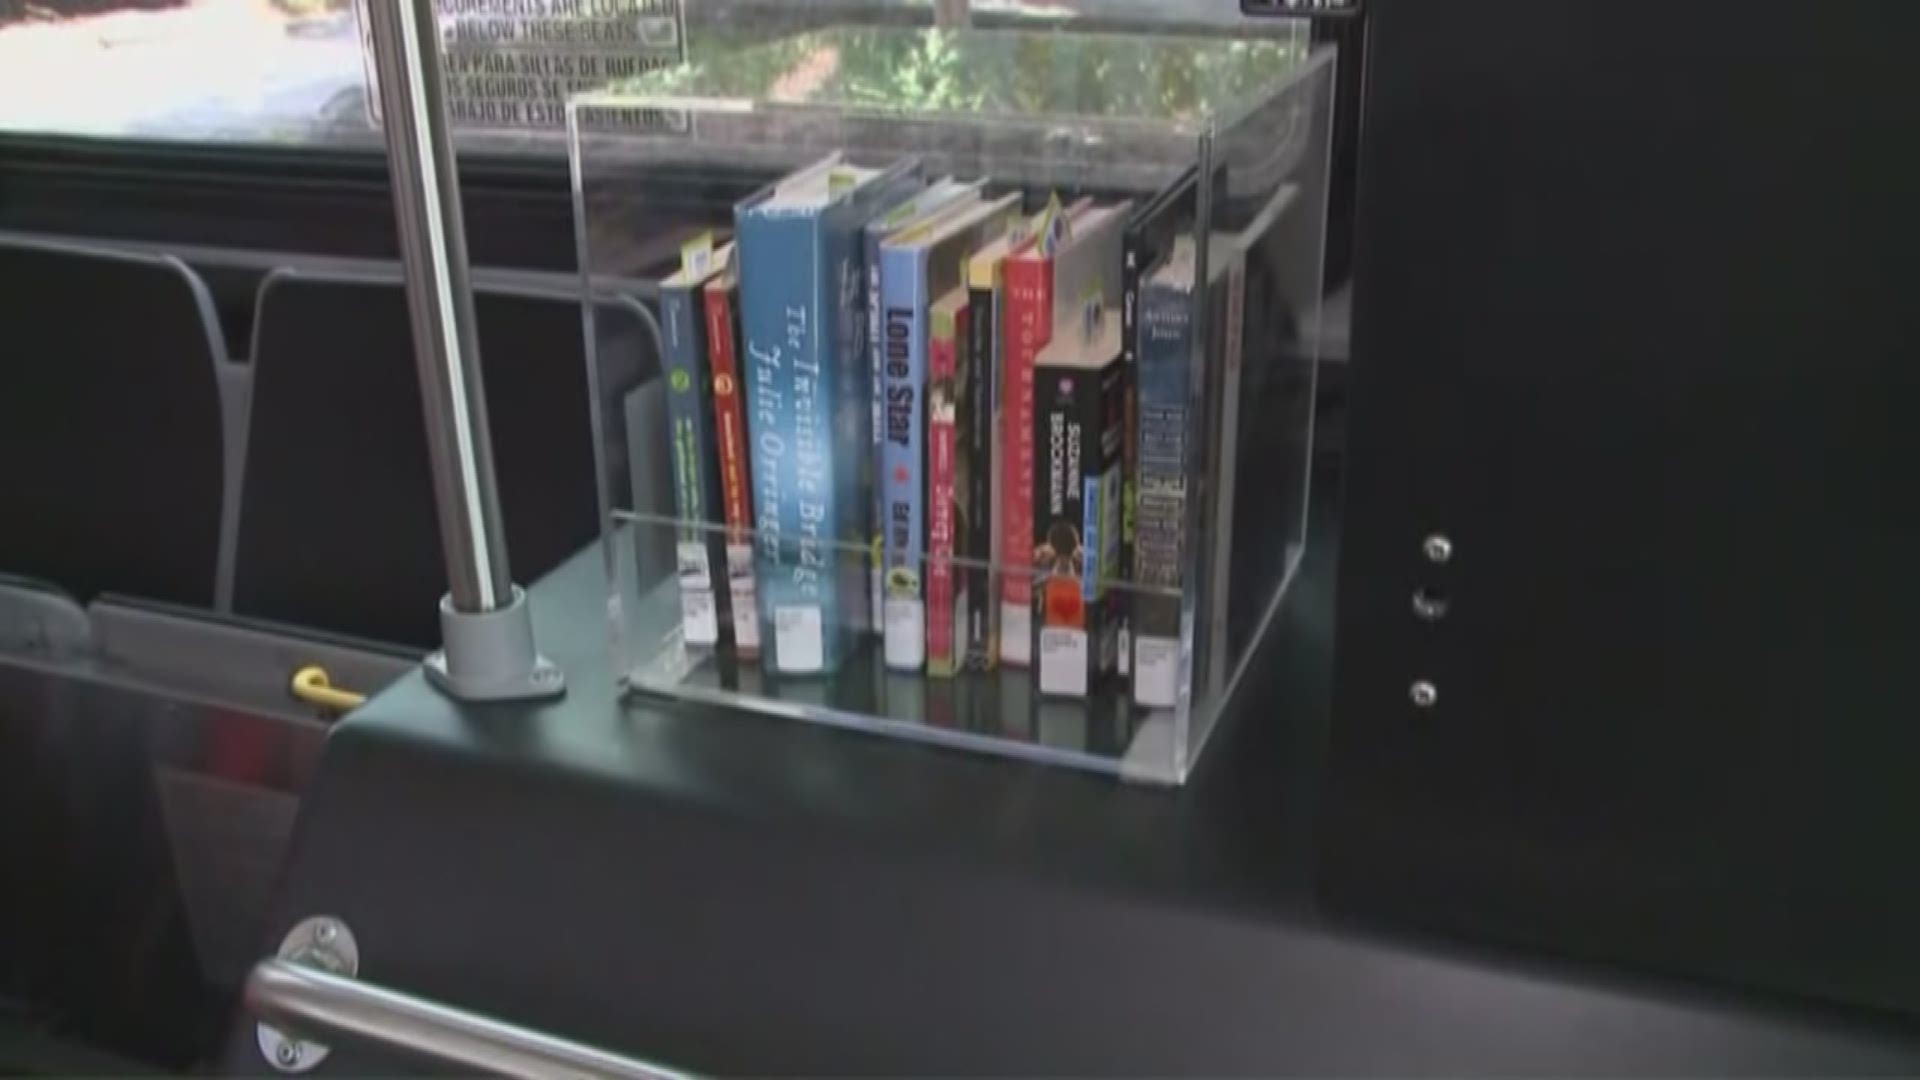 Knoxville Area Transit is partnering with the Knox County Library to offer books to commuters on their bus rides.